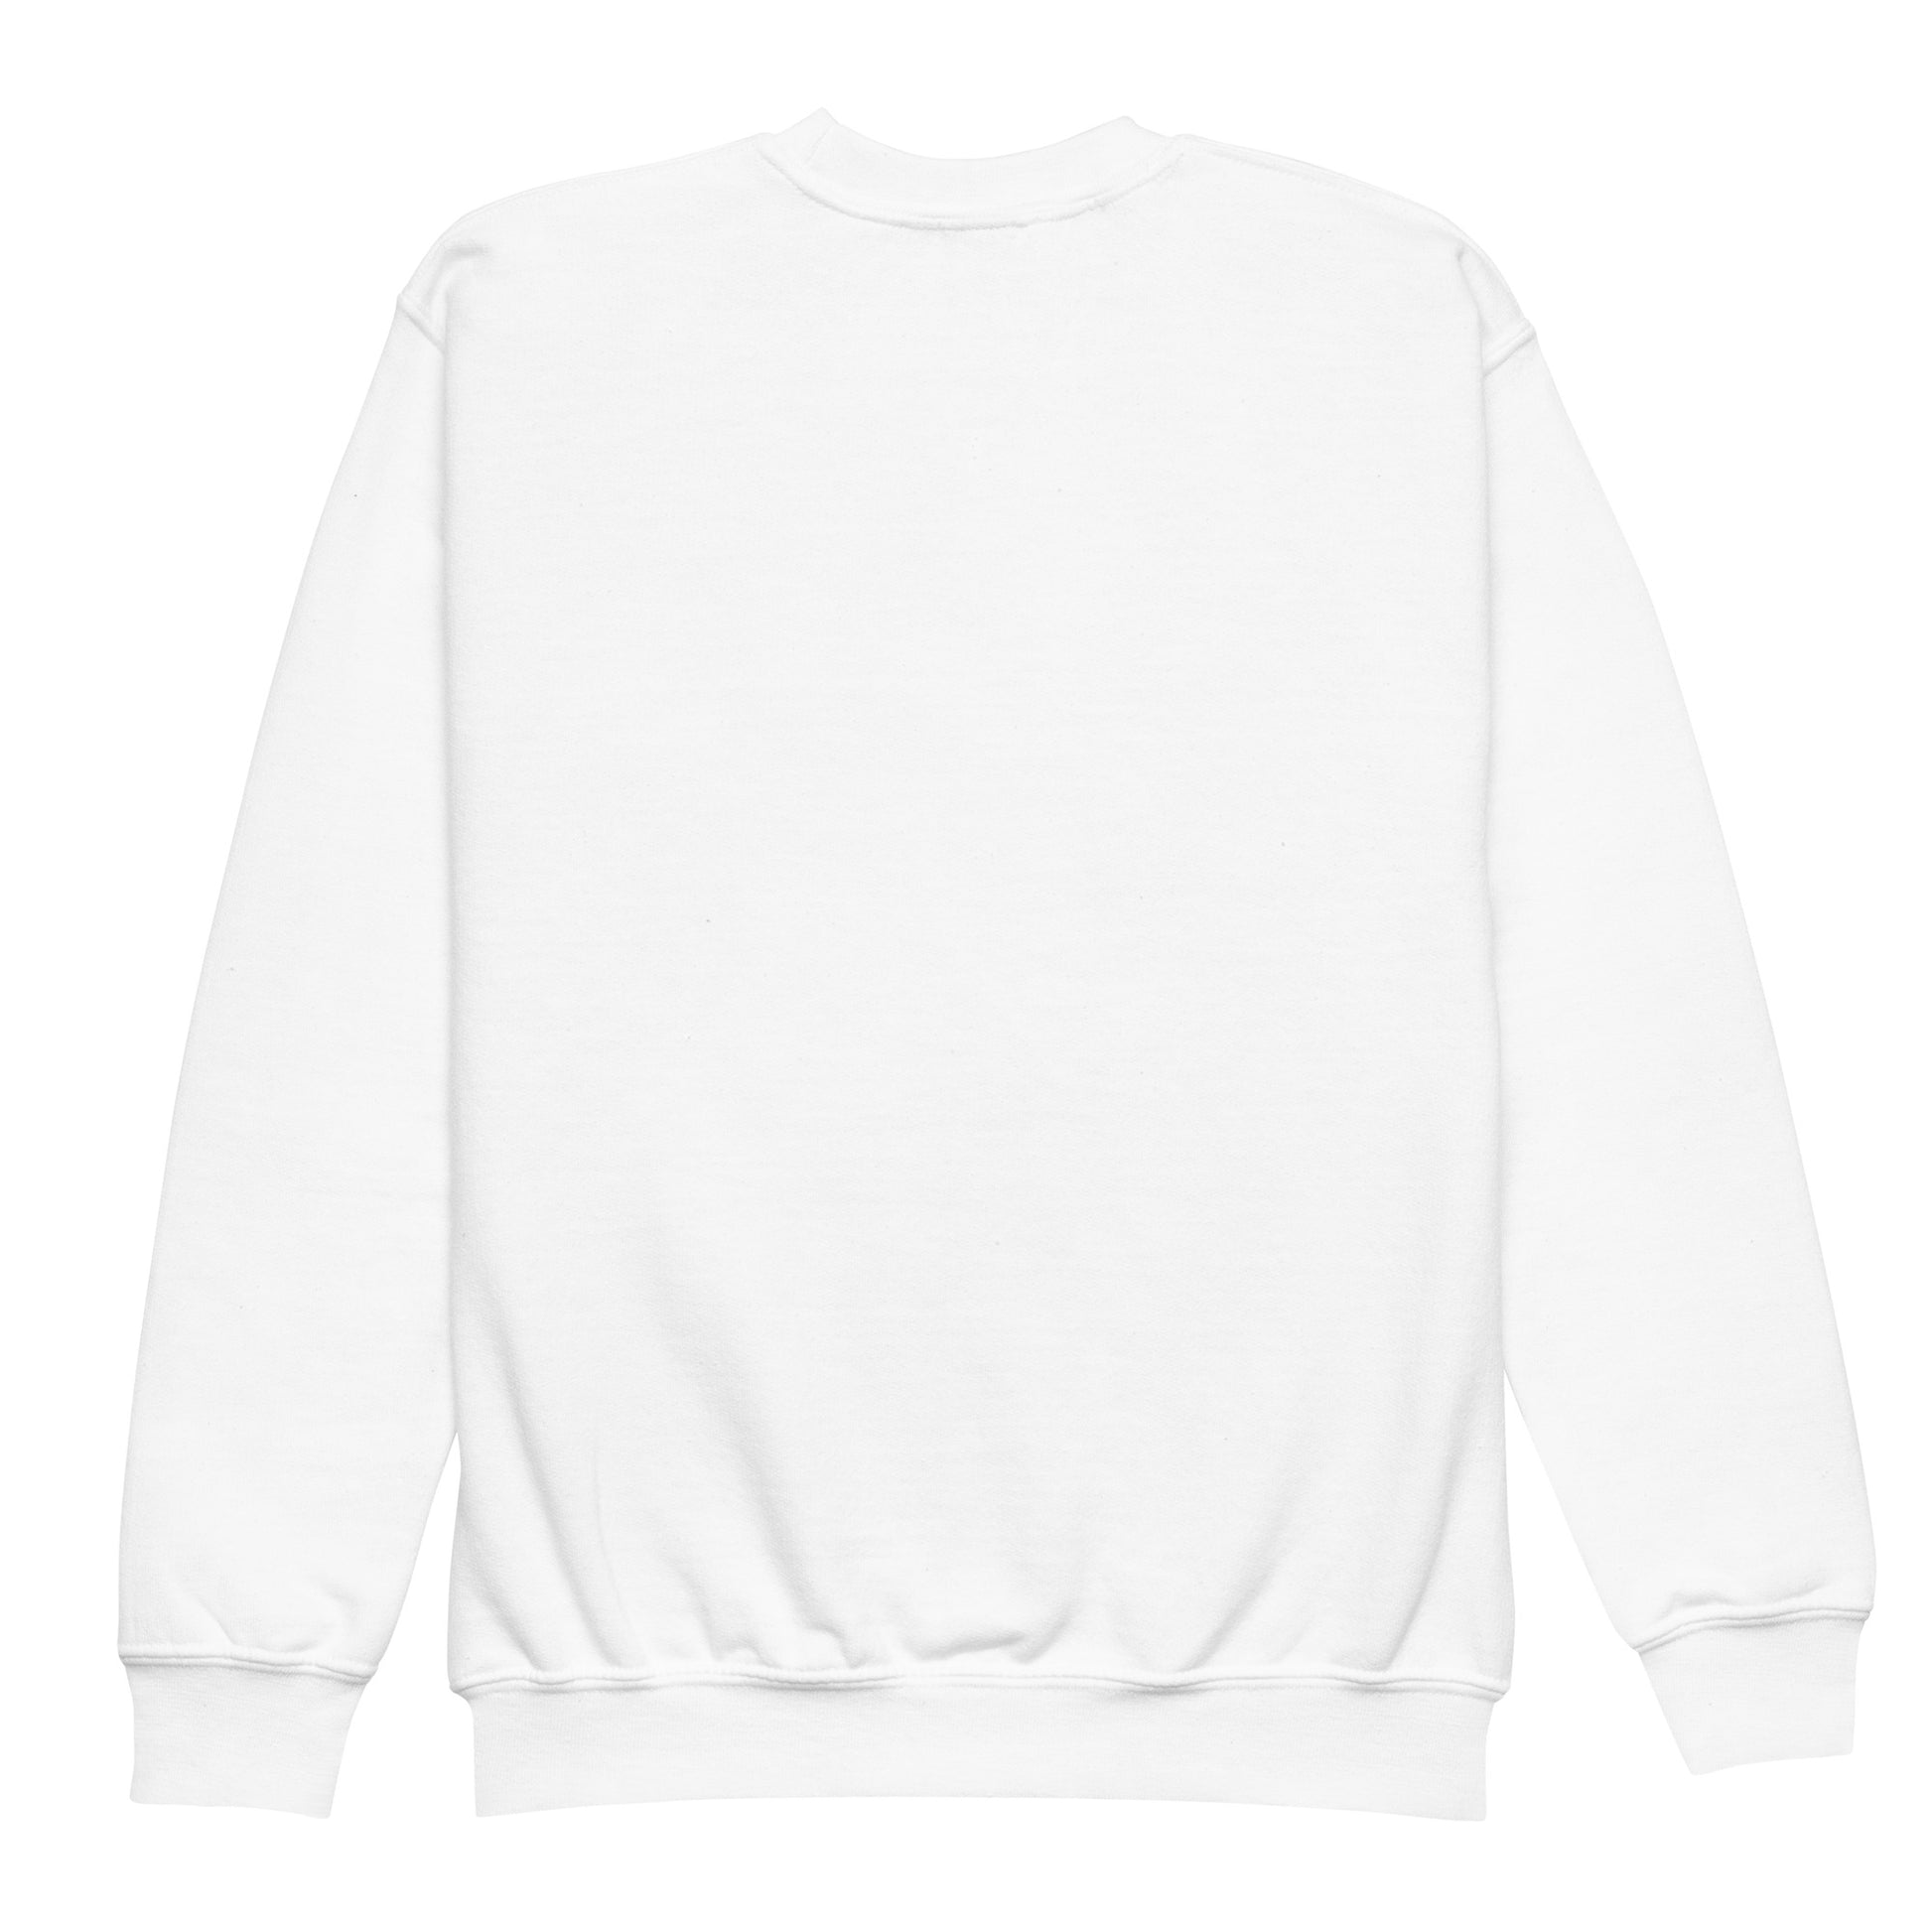 a white sweatshirt with a long sleeves and a round neck